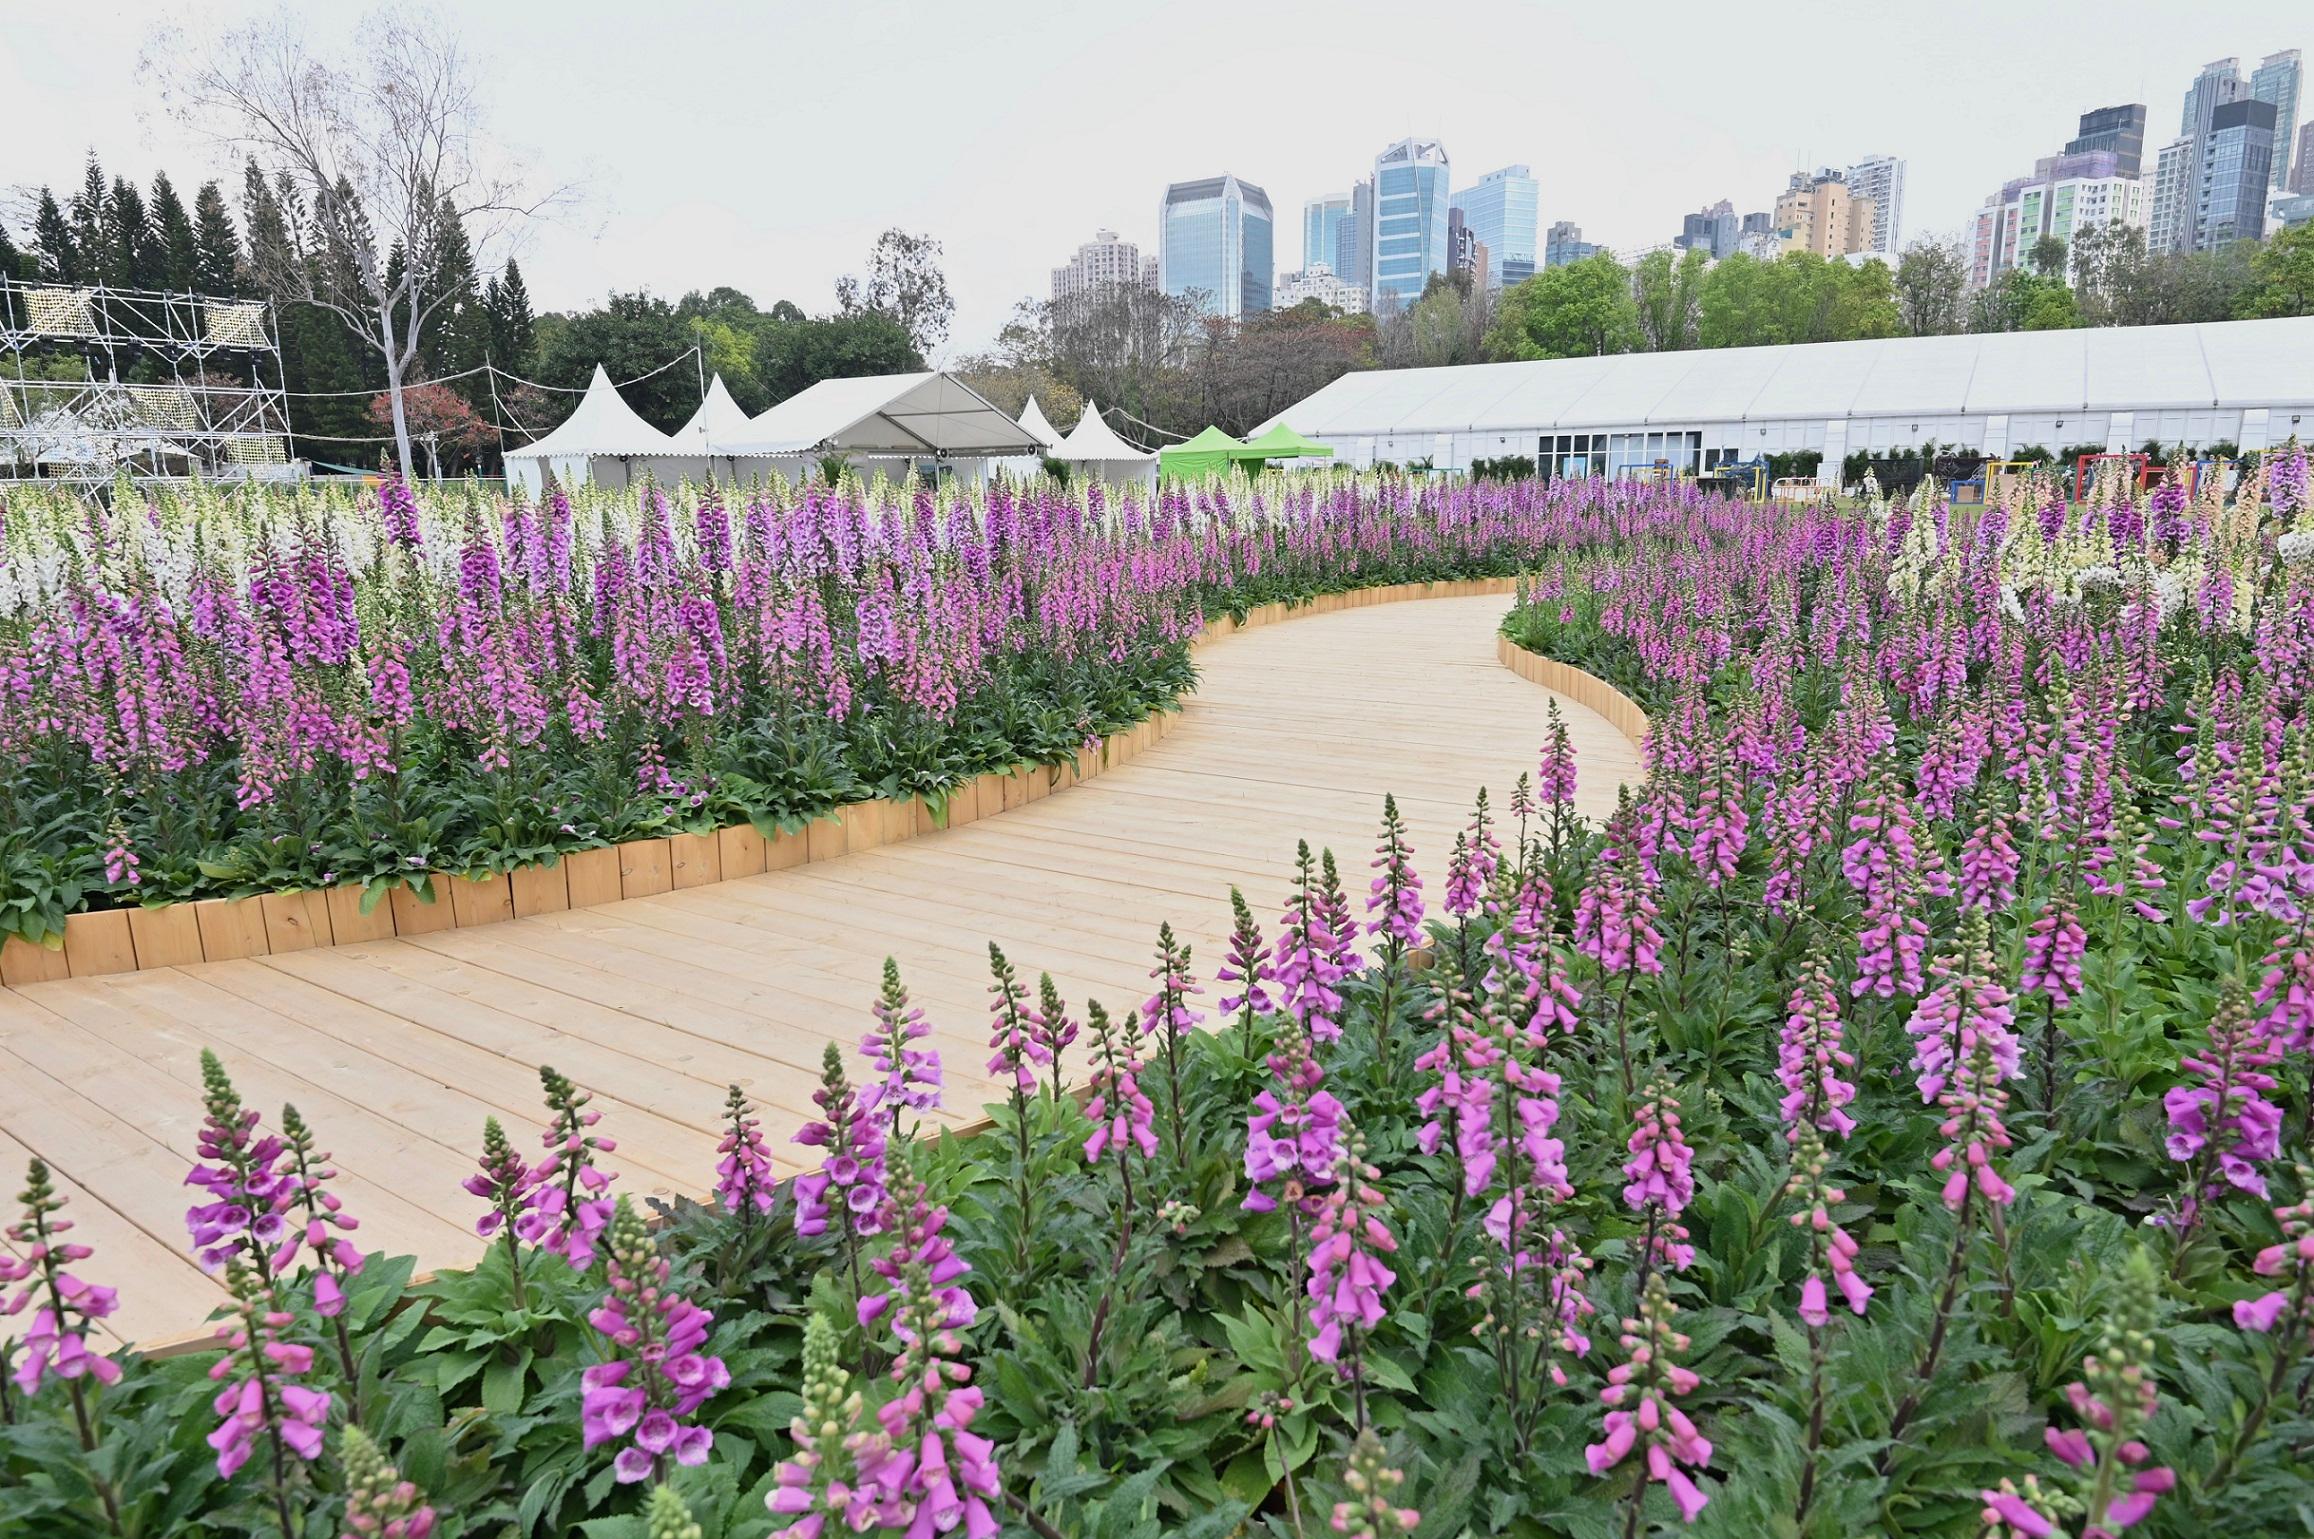 The Hong Kong Flower Show 2023 will be held at Victoria Park from tomorrow (March 10) until March 19. This year's flower show features "Bliss in Bloom" as the main theme and hydrangea as the theme flower. Photo shows a sea of foxgloves set up on the central lawn. With its distinctive arrangement as an elongated bell-shaped cluster, the foxglove flower sea will be another popular attraction of the flower show without doubt.